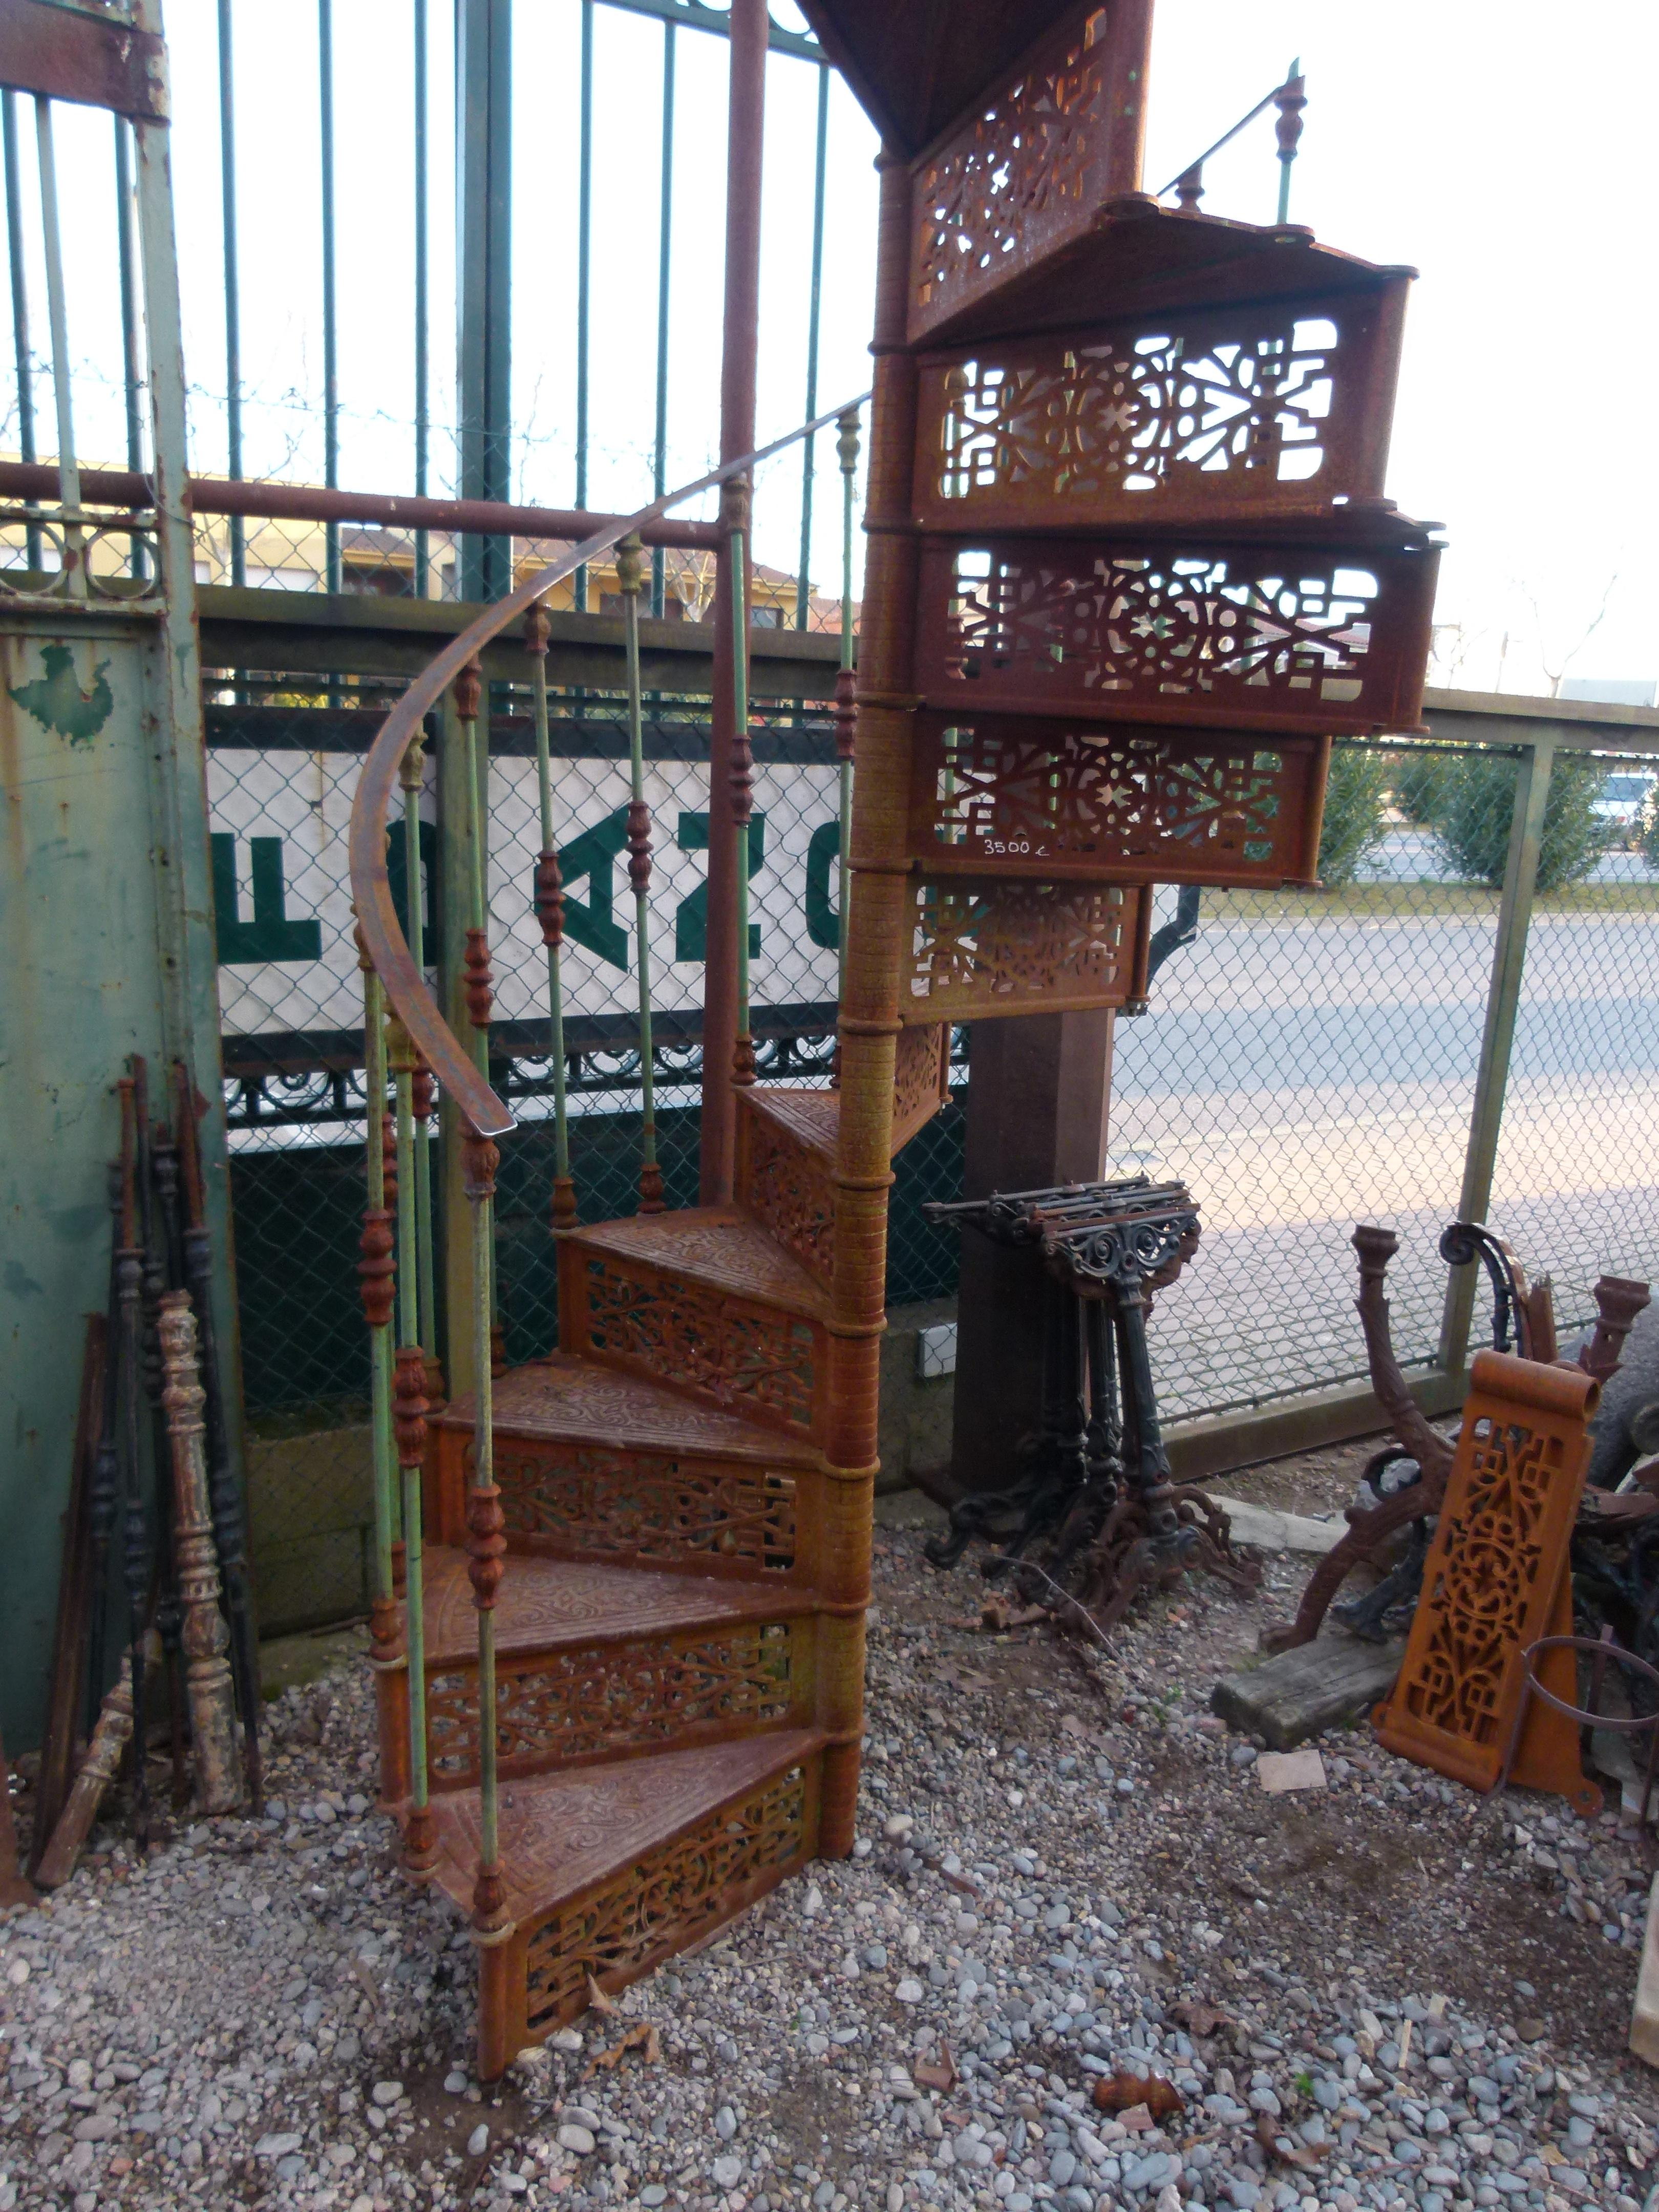 20th century Art Nouveau style spiral staircase from Spain in good condition and easy to assemble. 

This stair belonged to an old factory that closed at the end of the 20th century in Spain. This staircase was missing the rail and was added new